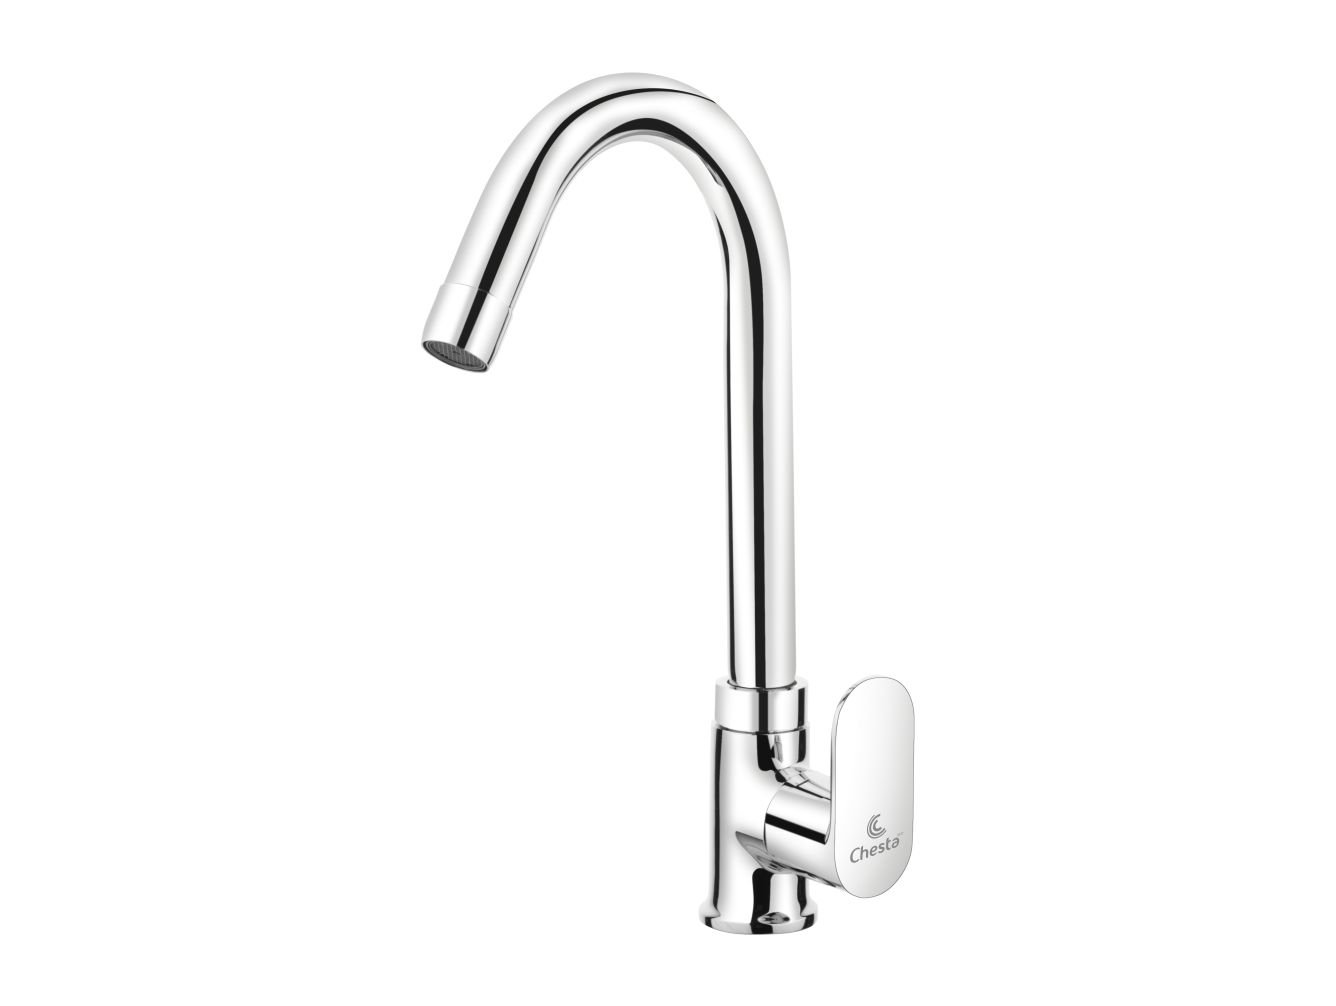 IC - 1008 - Swan Neck Faucets at Chesta Bath Fittings